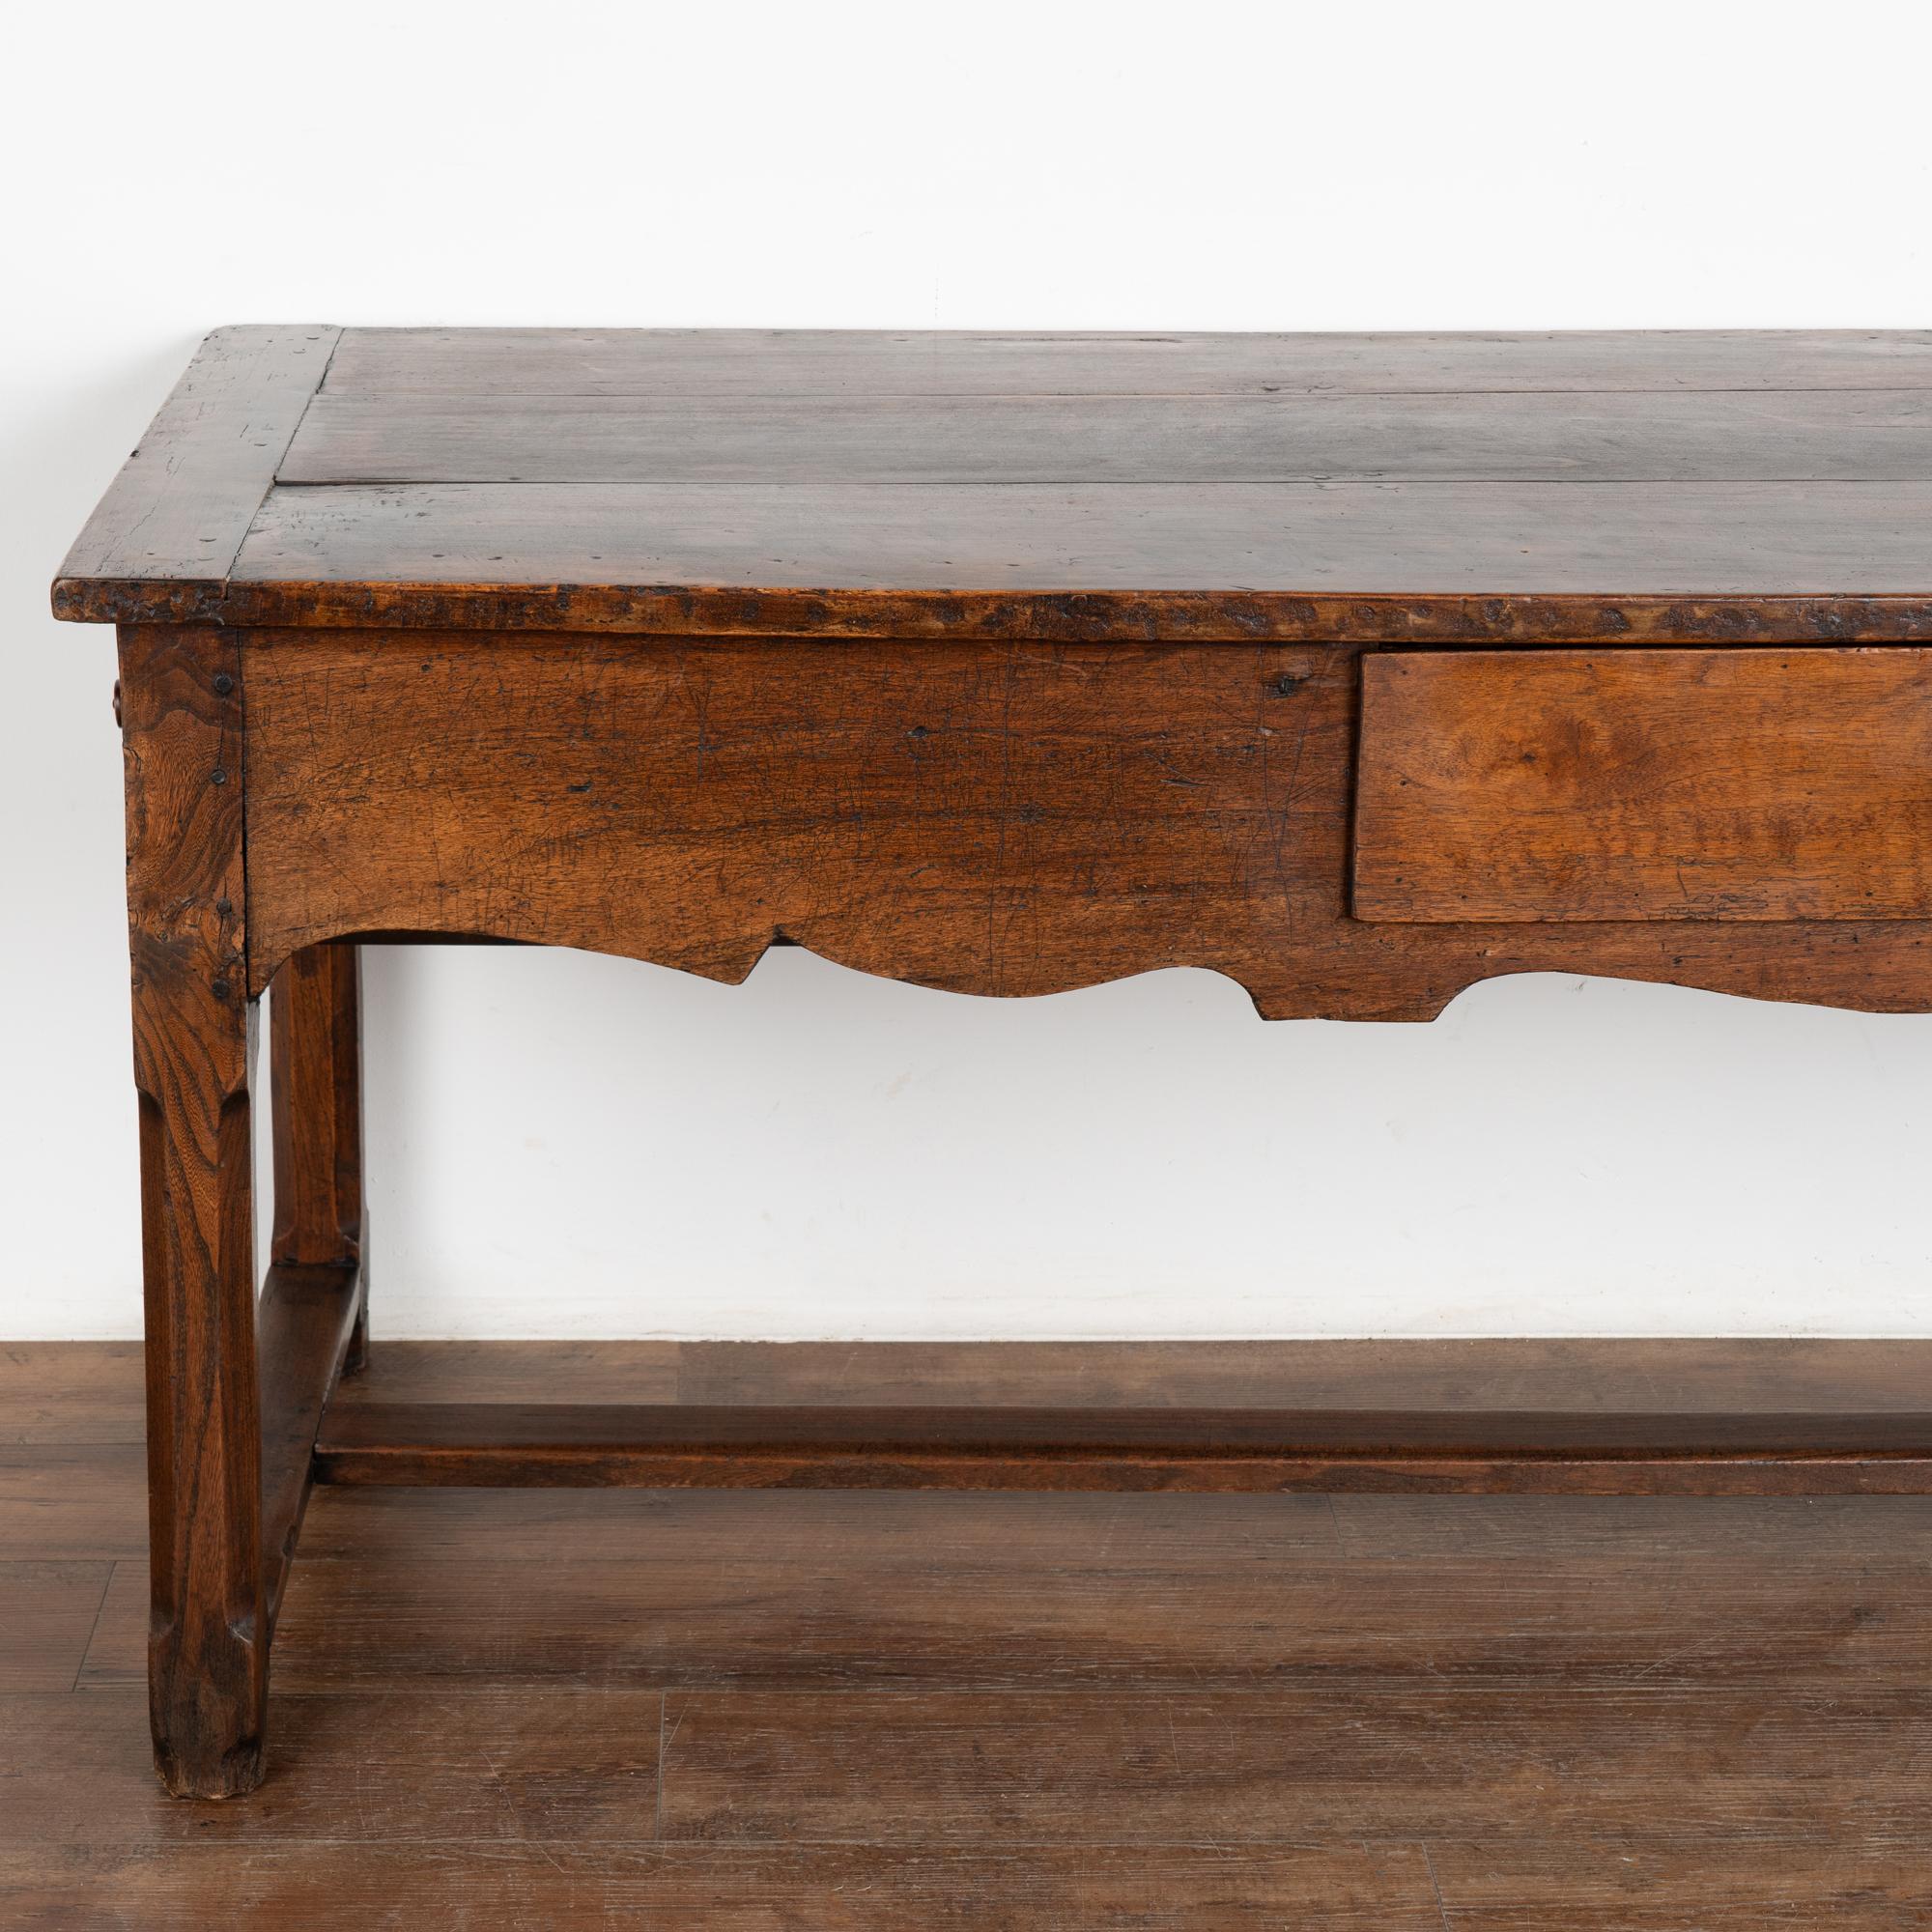 Antique French Console Table With Drawers, circa 1800-40 4